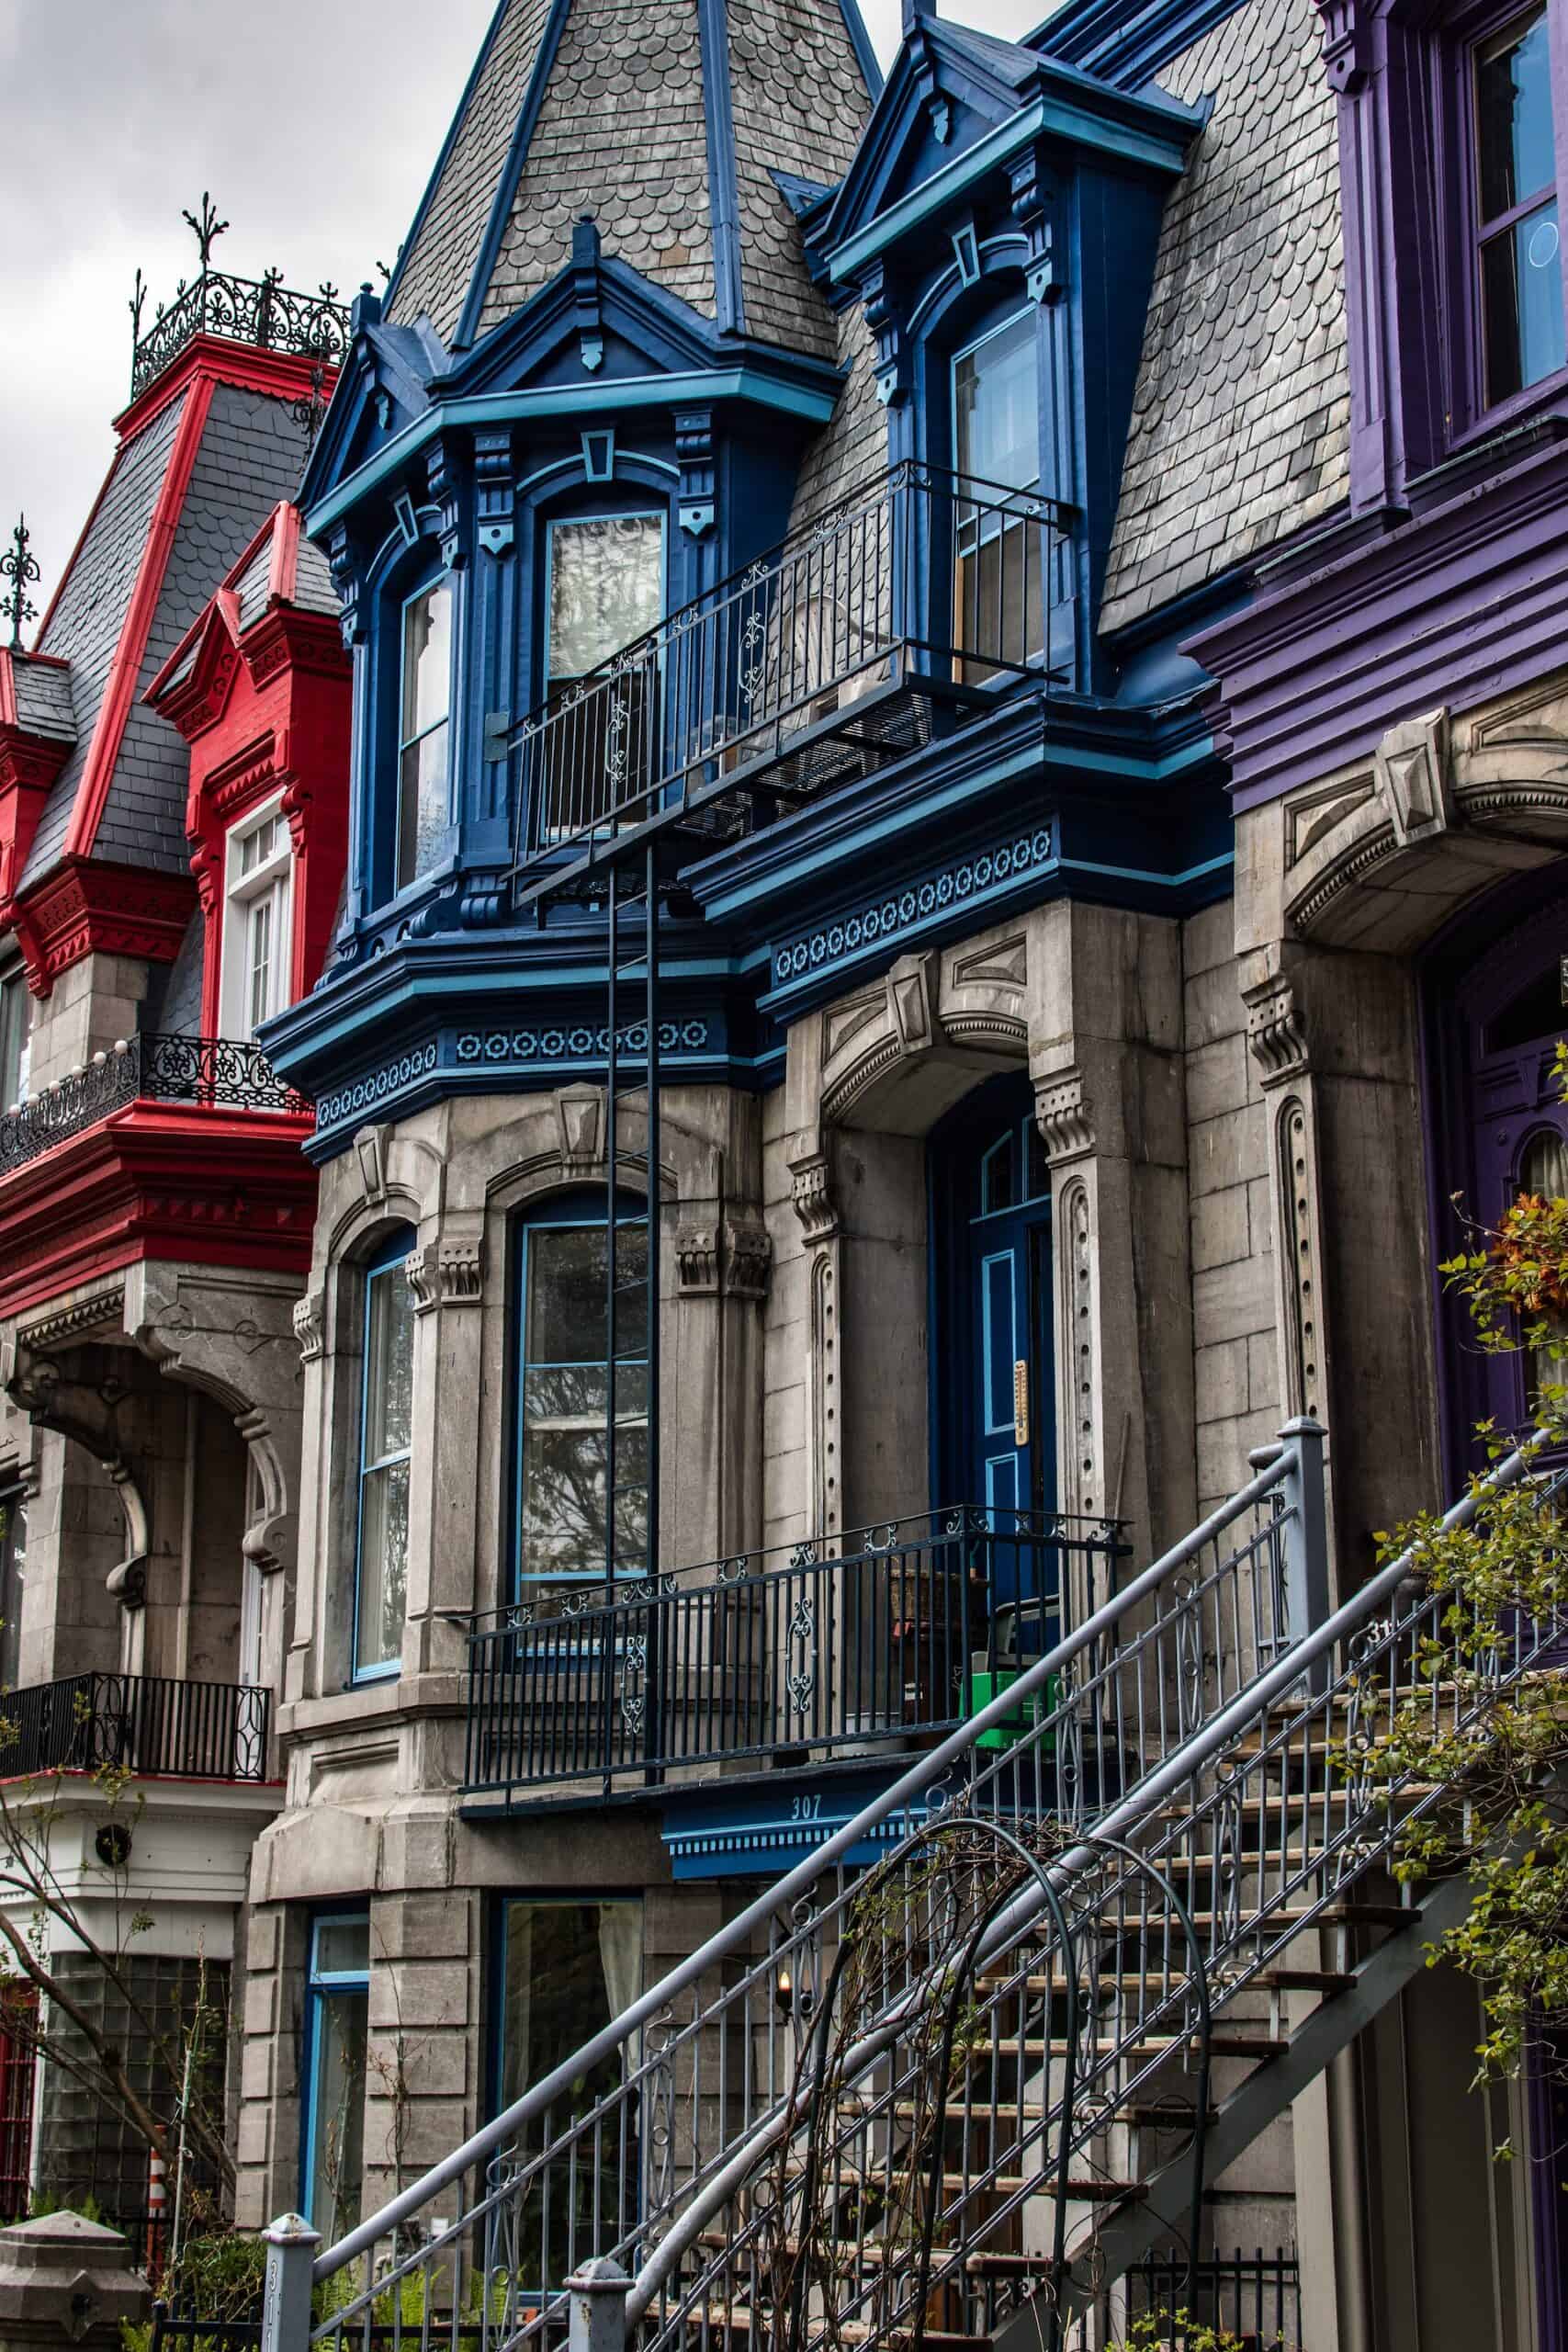 Best things to do in Montreal Canada - Craig Thorn - Classic architecture on Montreal streets by Etienne Delorieux on Unsplash